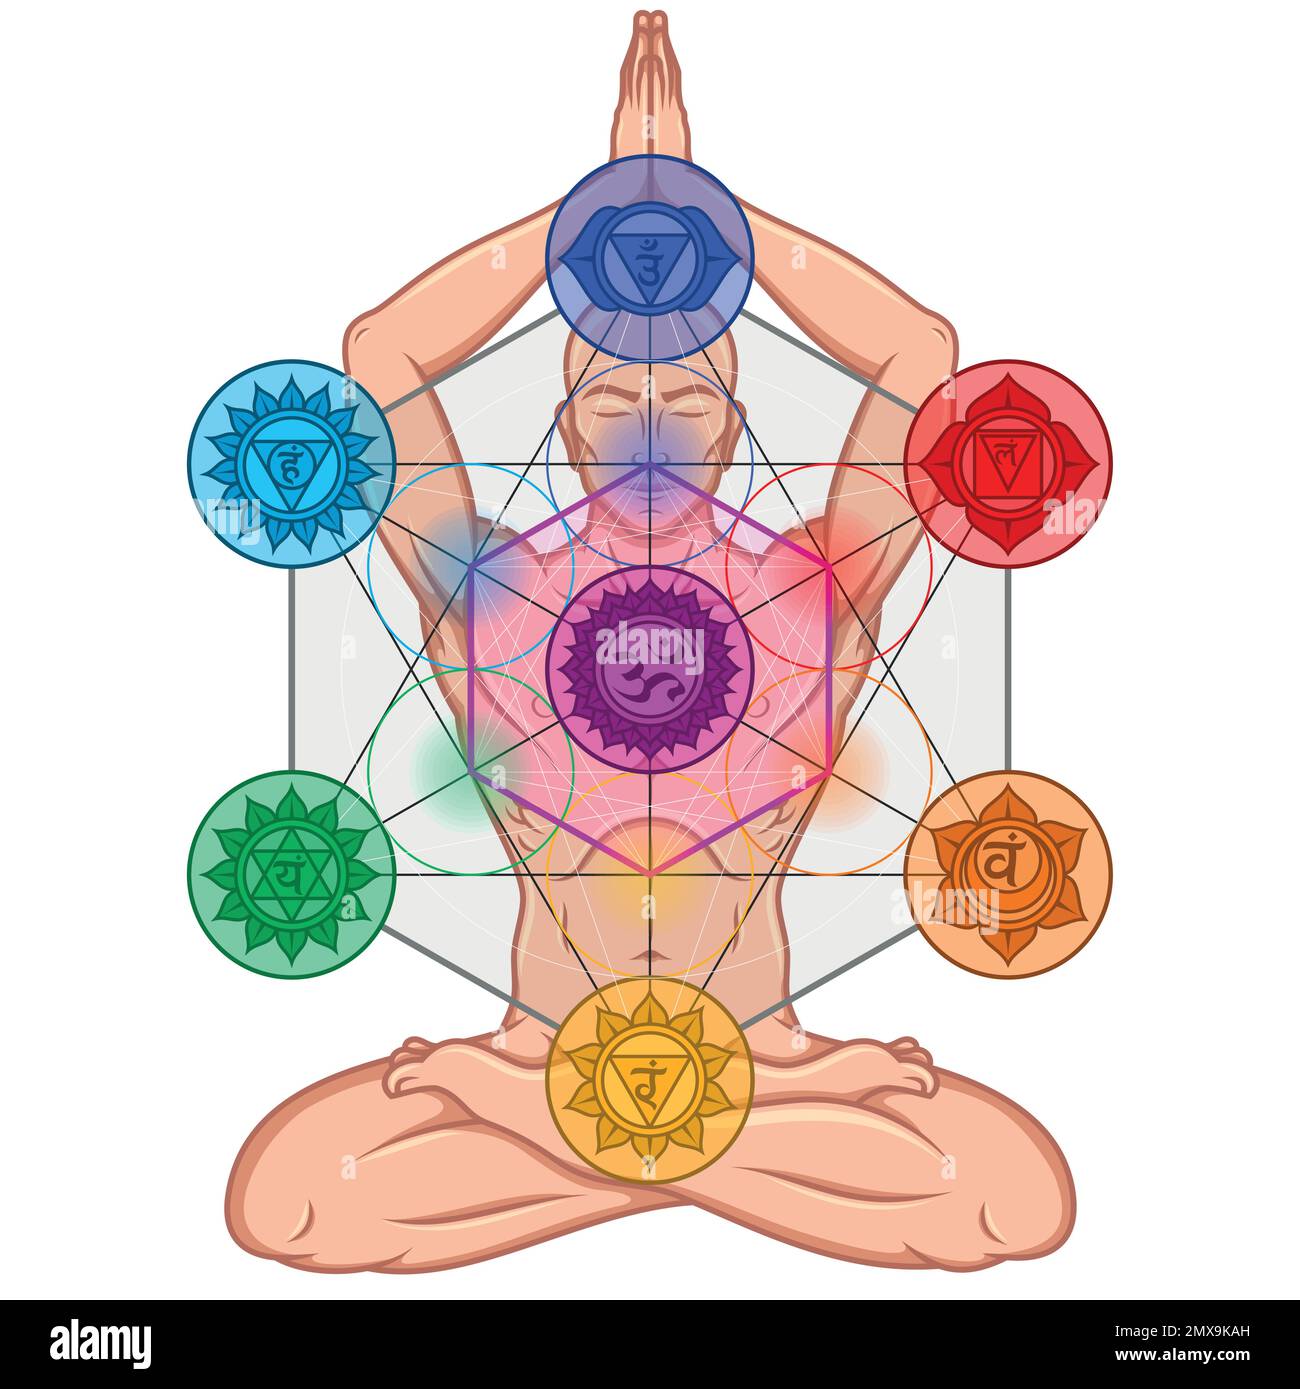 Vector design of man meditating in lotus flower position with metatron figure and chakra symbol Stock Vector